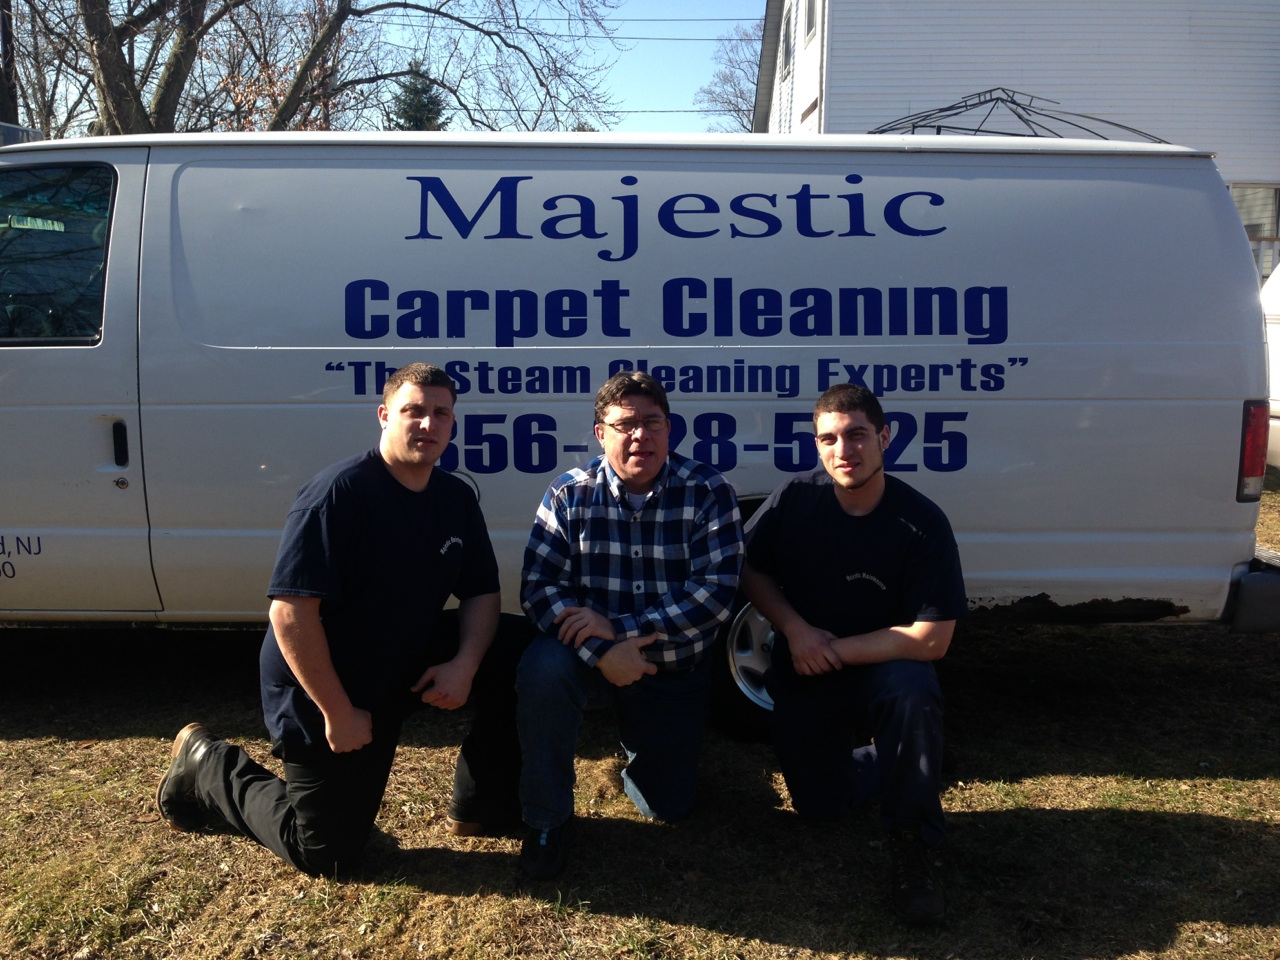 Transform Your Carpet with Majestic - Book Your Cherry Hill Carpet Cleaning Today